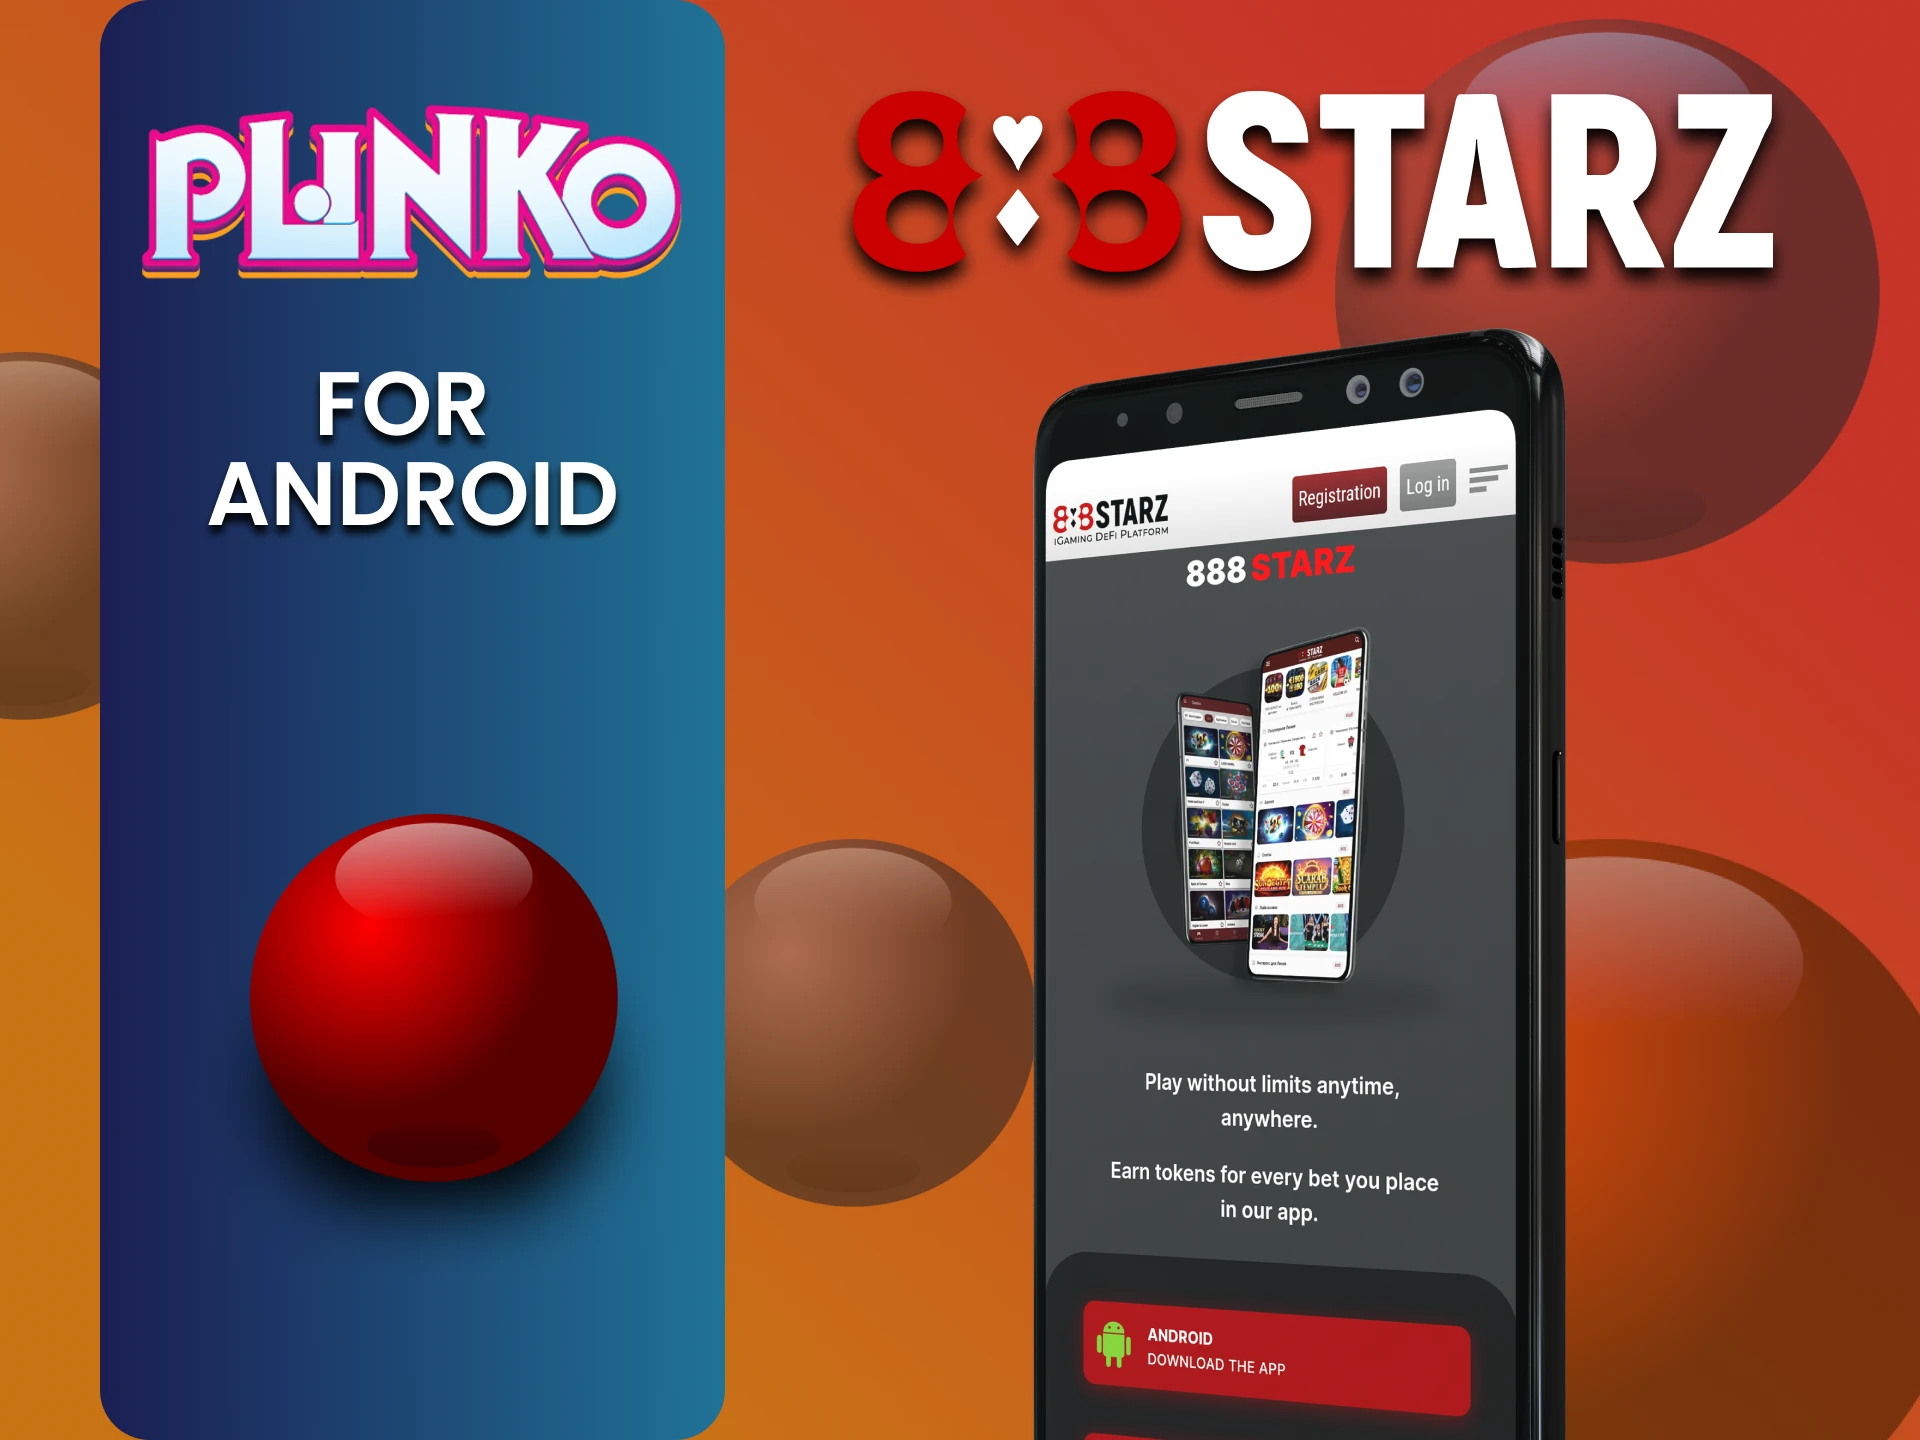 Download the 888starz app to play Plinko on Android.